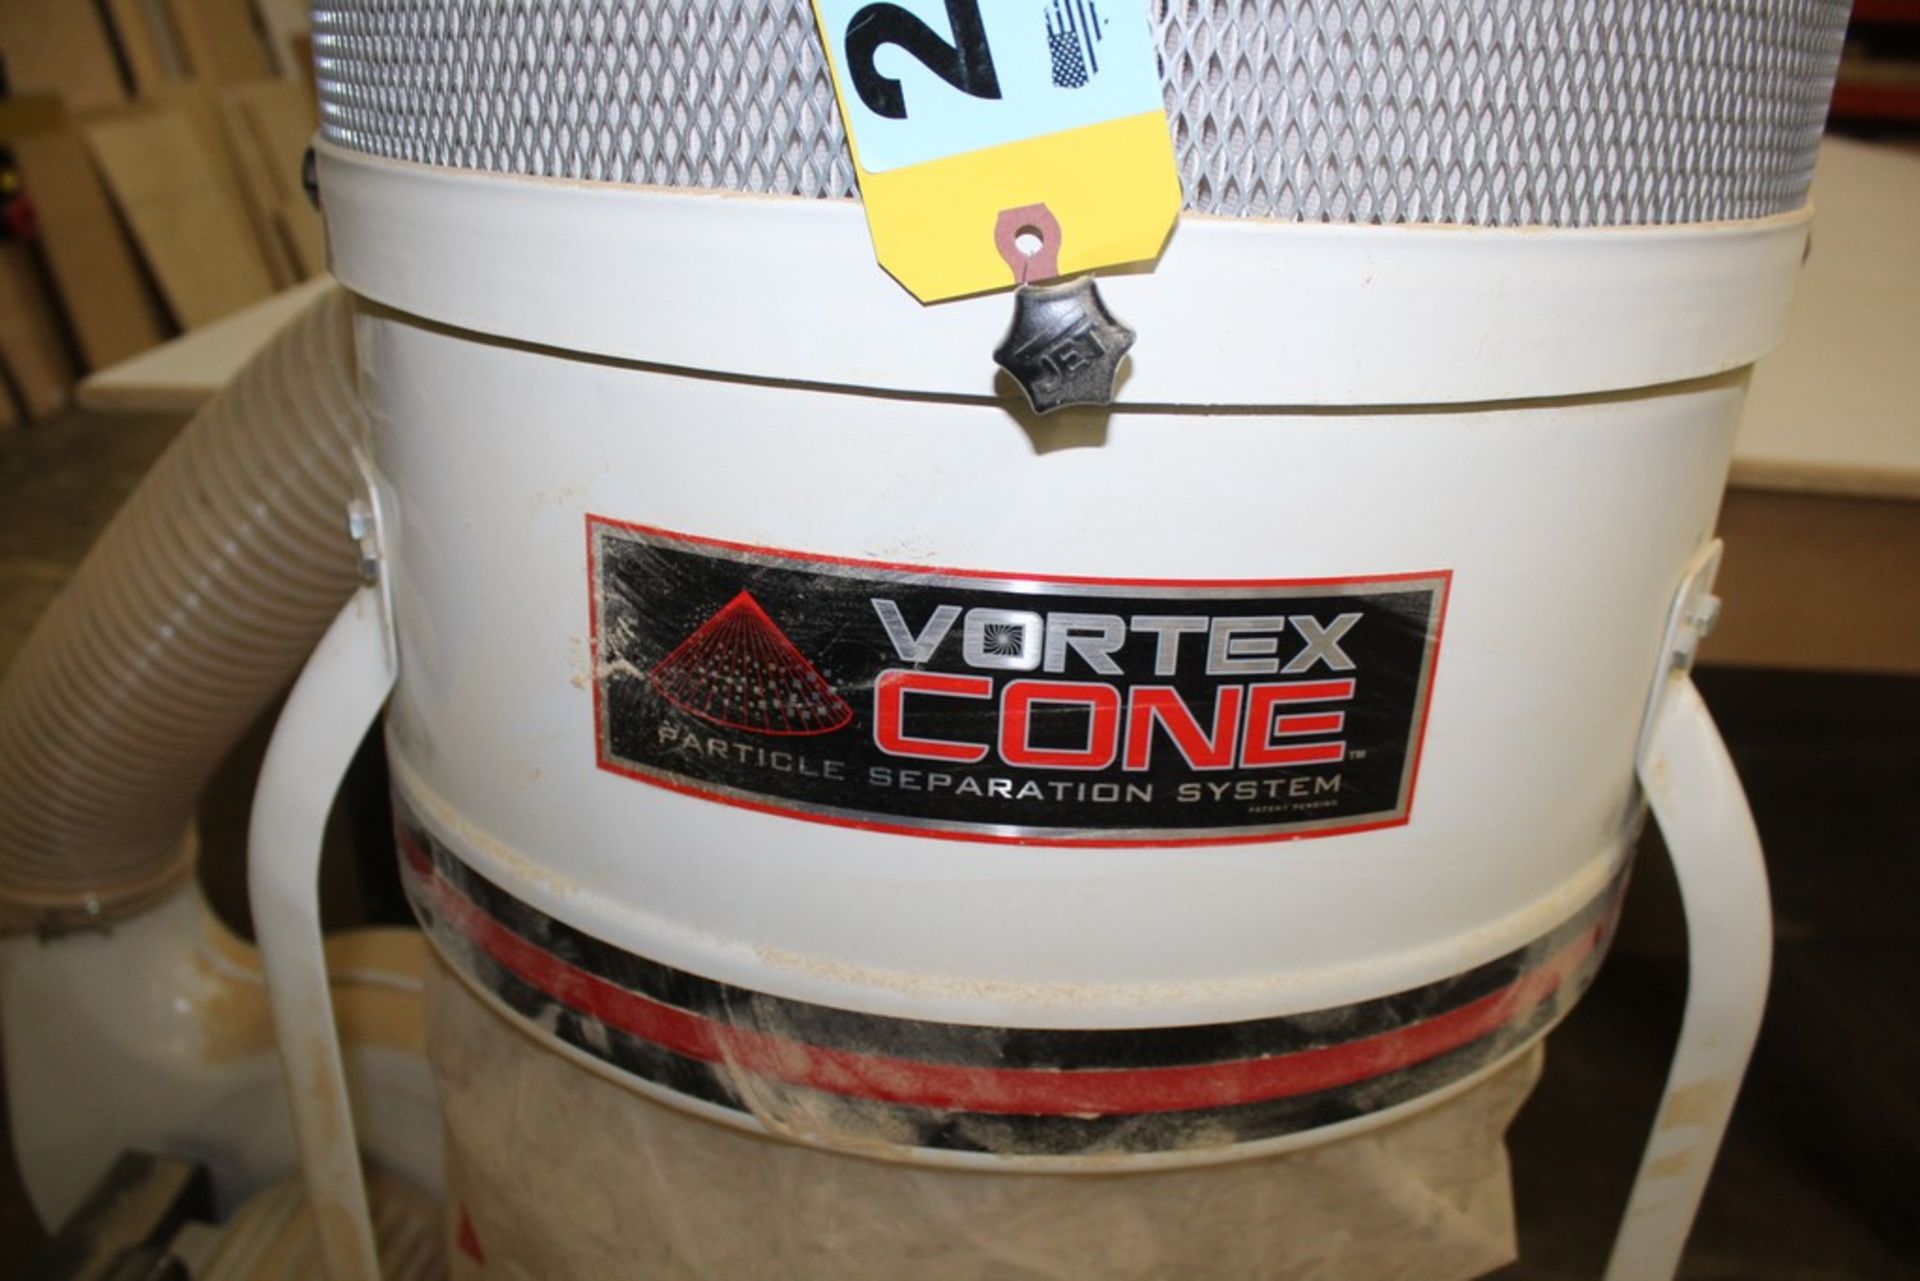 JET VORTEX CONE PARTICLE SEPARATION SYSTEM - Image 2 of 4